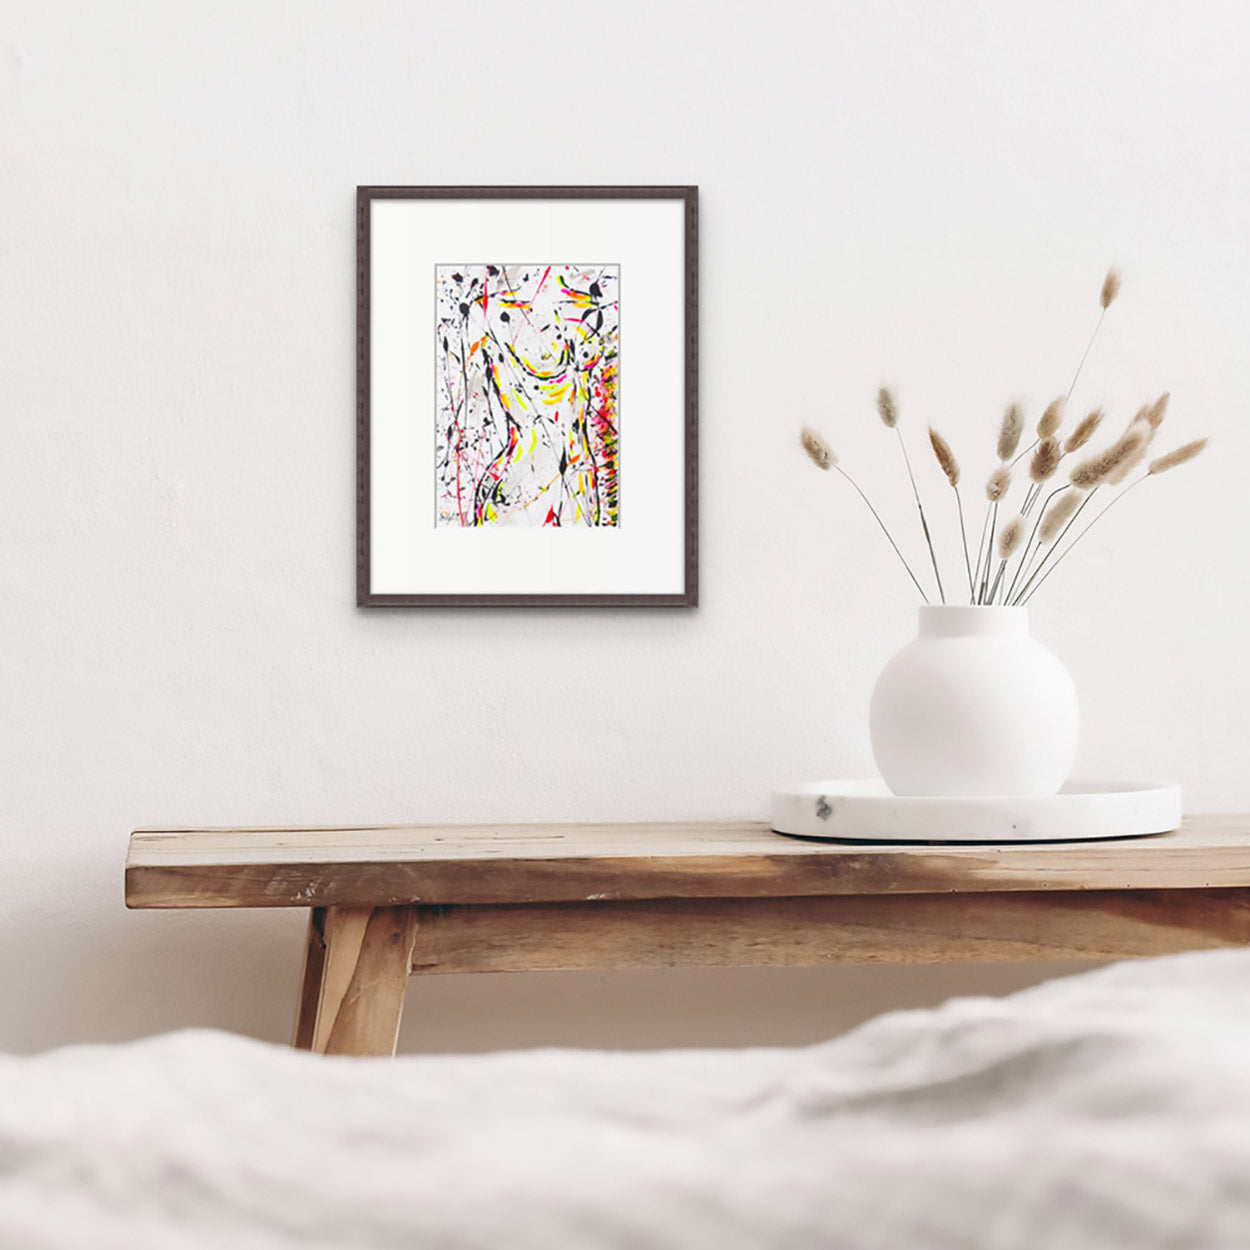 Nude I original abstract , mixed media painting seen framed on wall in situ. Art by Bridget Bradley